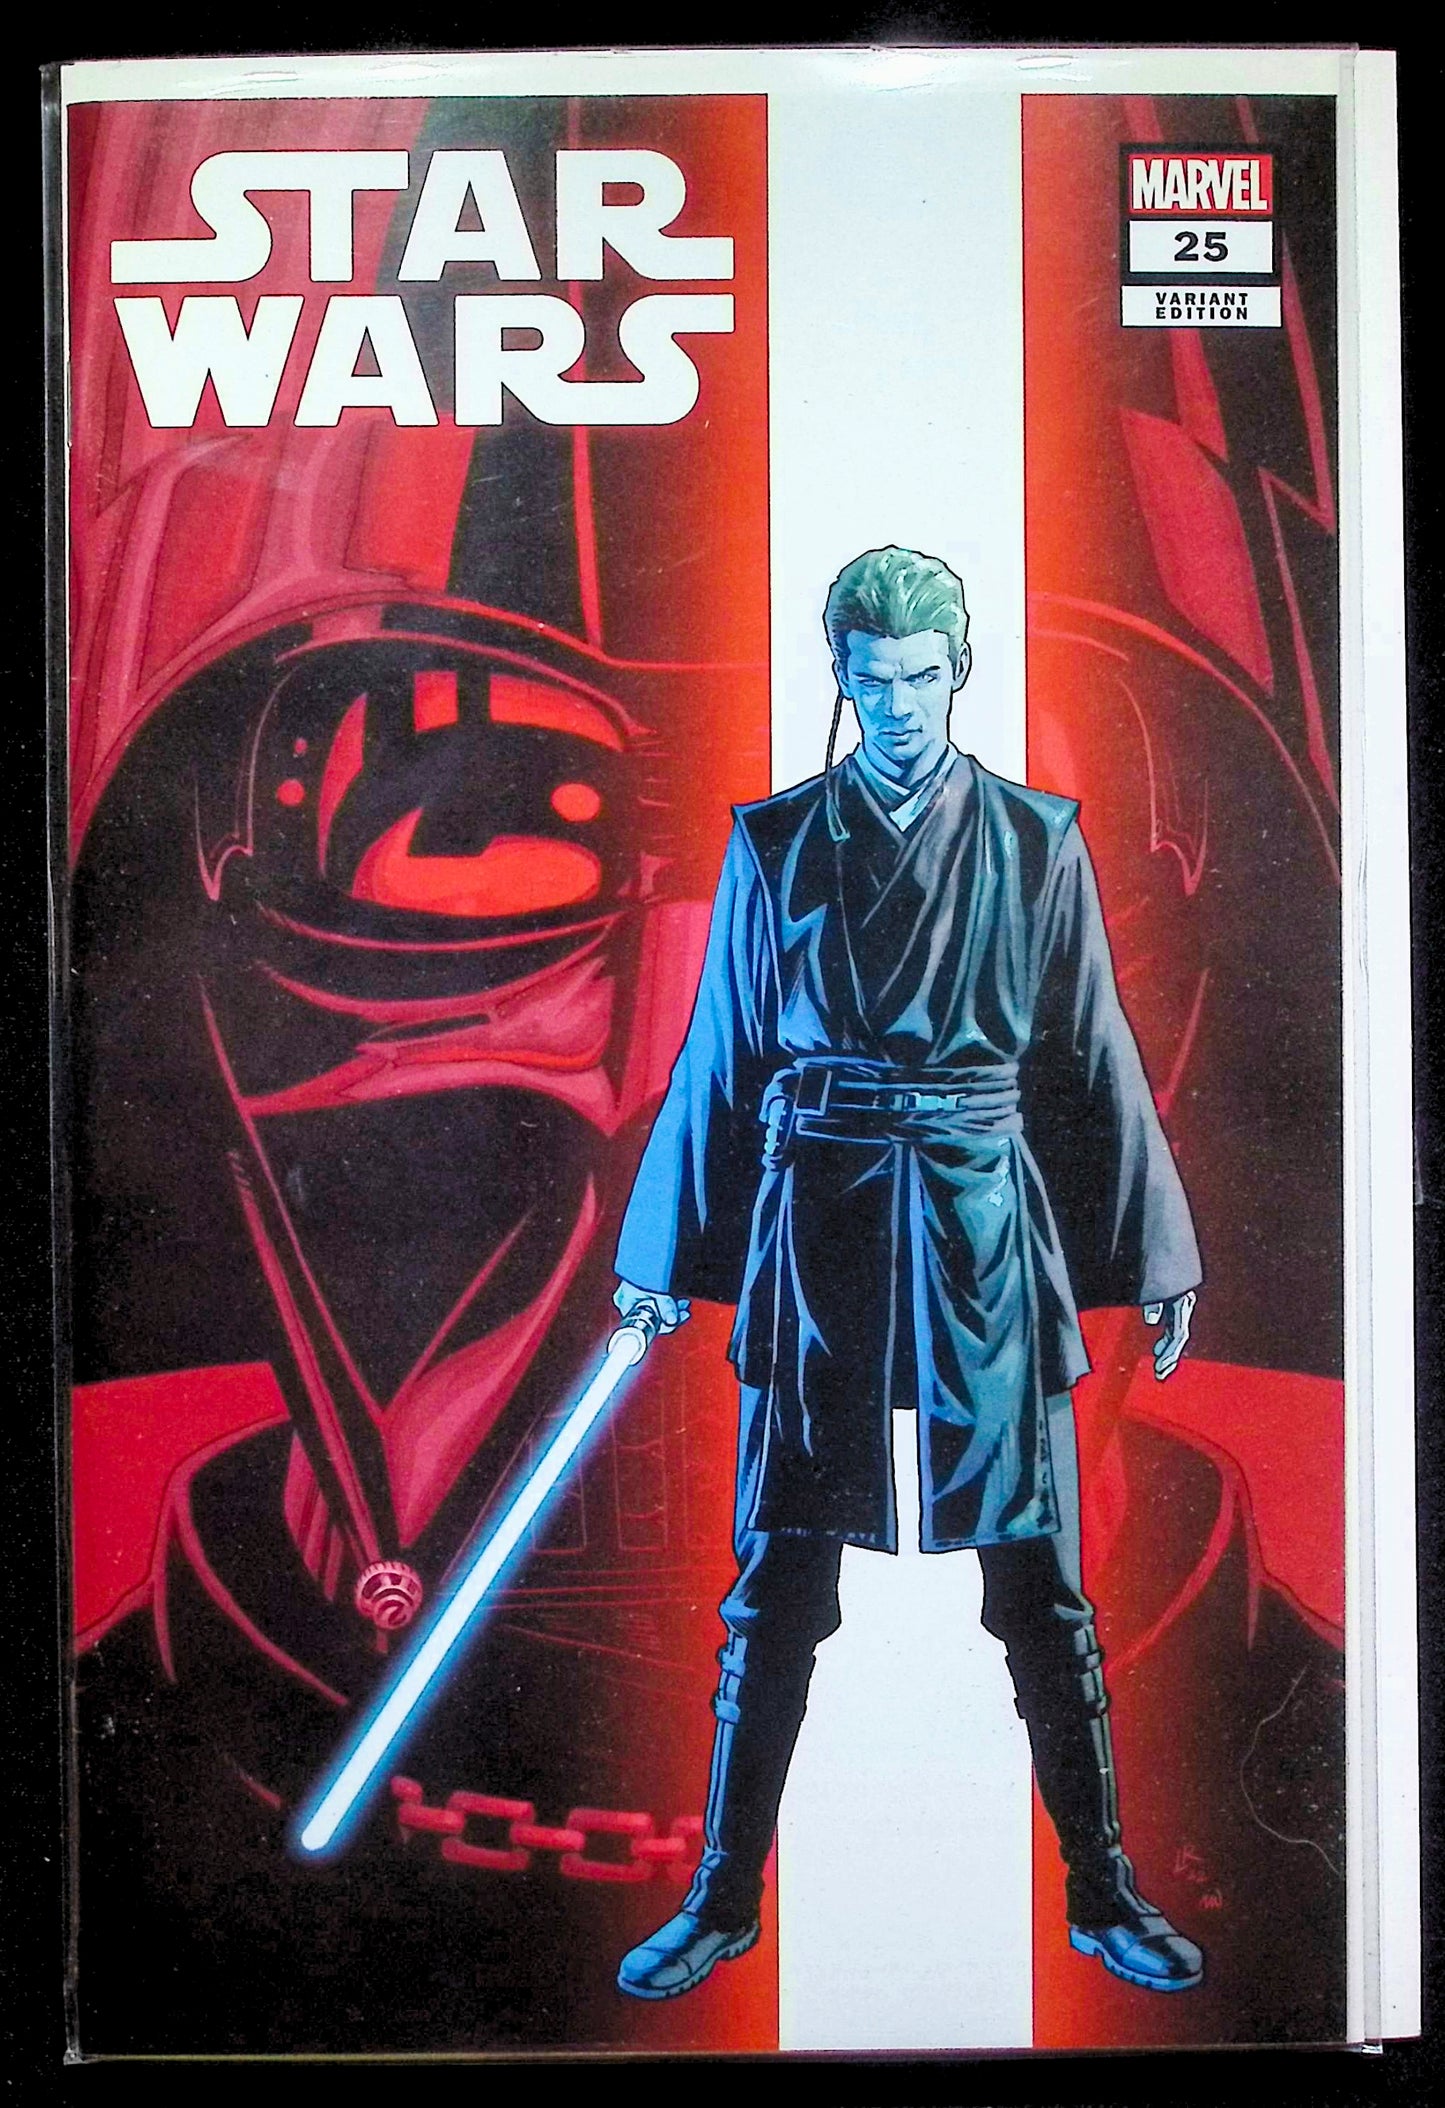 STAR WARS #25 - LUKE ROSS VARIANT EDITION EXCLUSIVE